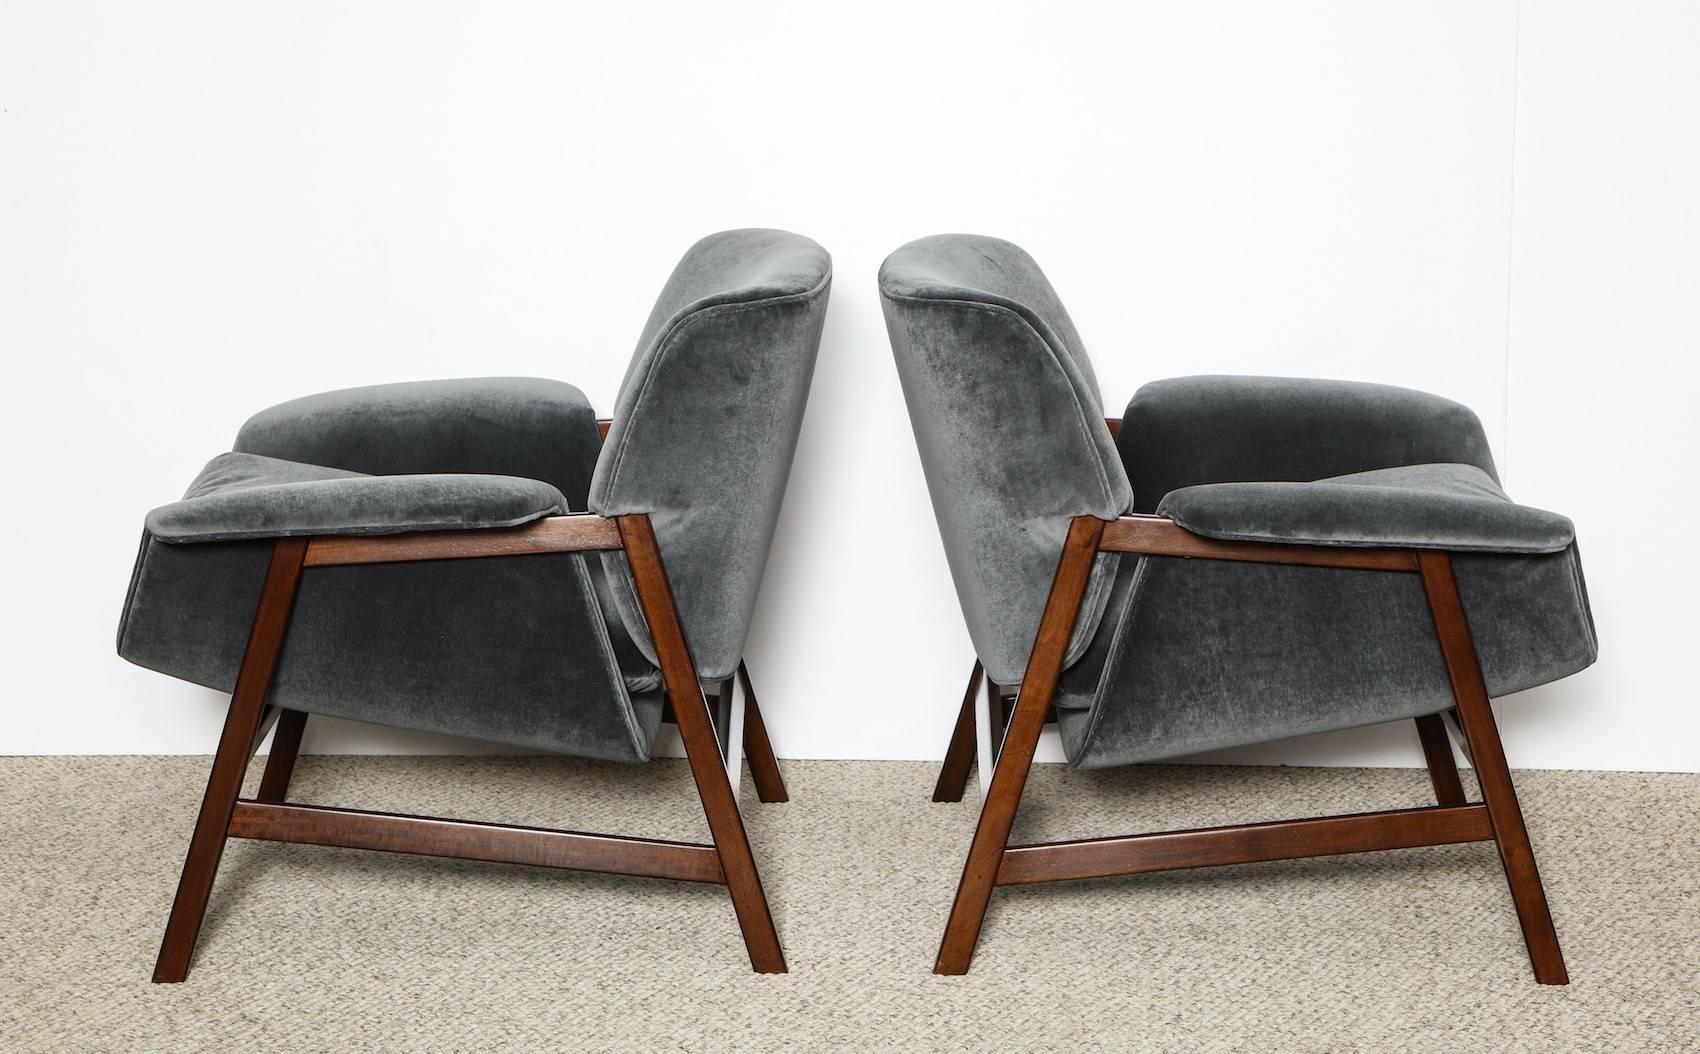 Pair of 849 lounge chairs by Gianfranco Frattini for Cassina. Low lounge chairs with great curves. Dark mahogany architectural structure cradles the upholstered seat and back. A Classic Frattini design, recently upholstered in blue-gray velvet.